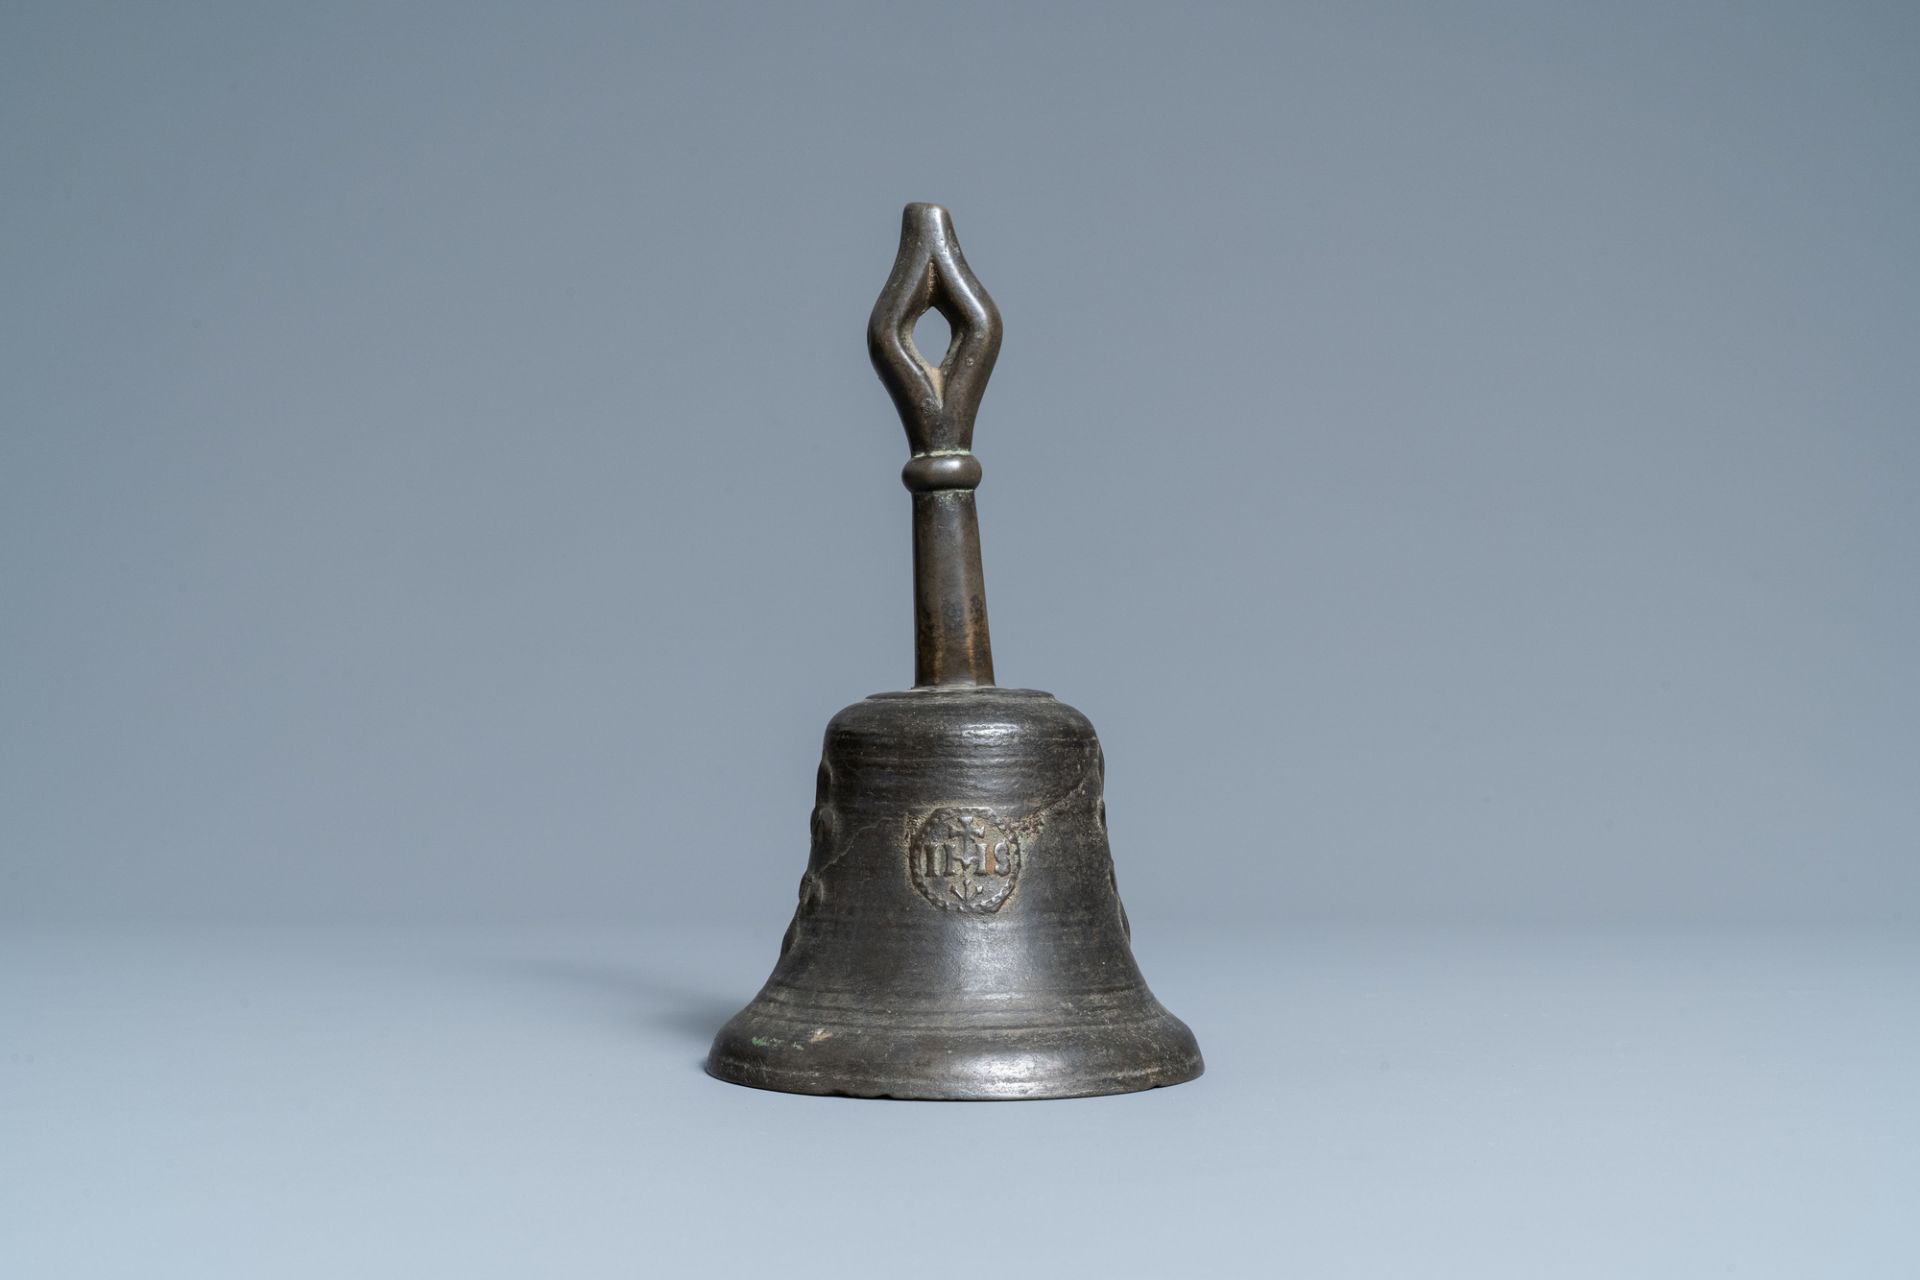 A bronze bell with applied fleur-de-lis and an IHS medallion, France, 16th C. - Image 4 of 7